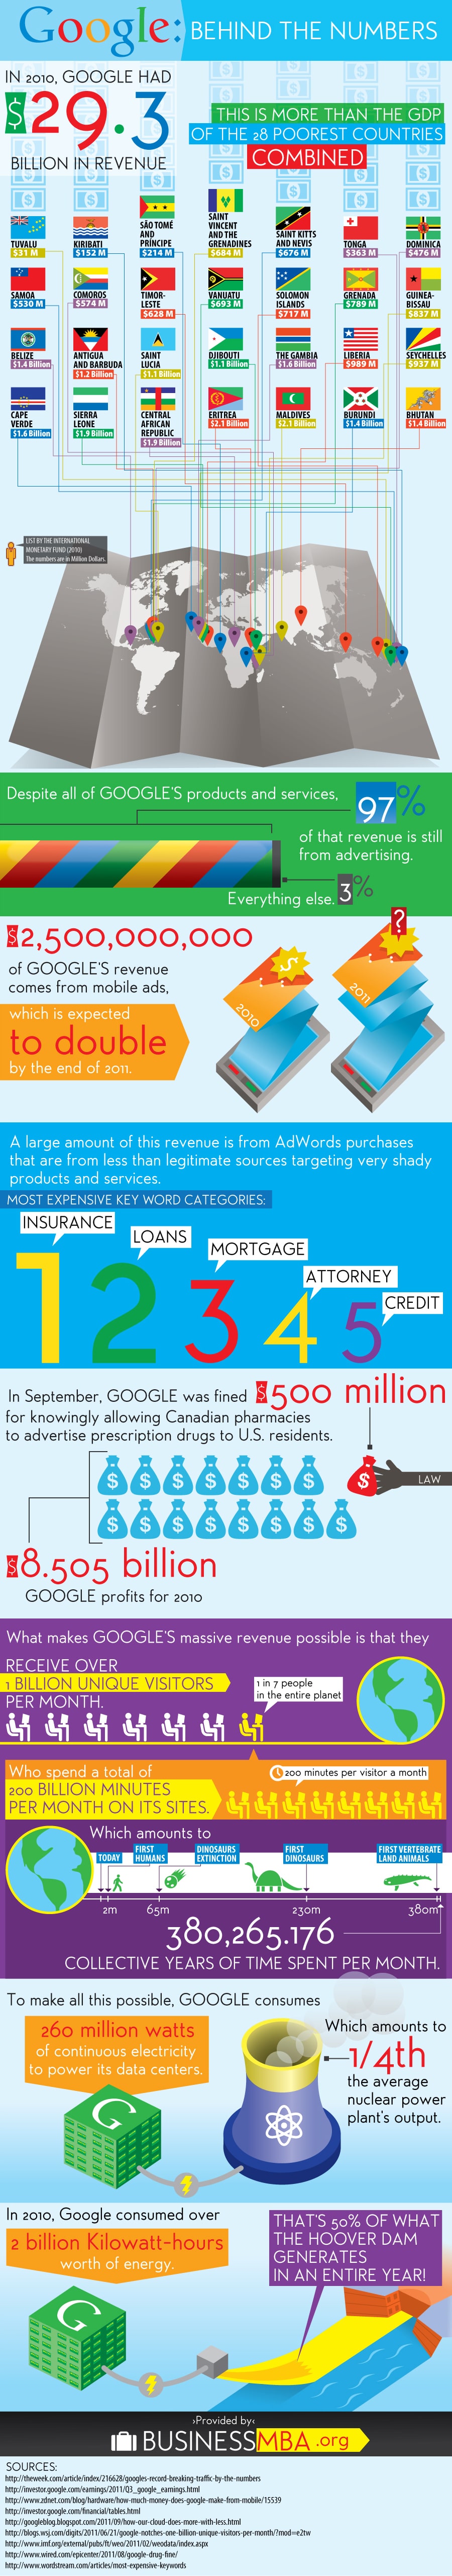 Google: The Ultimate Numbers Bomb [Infographic]